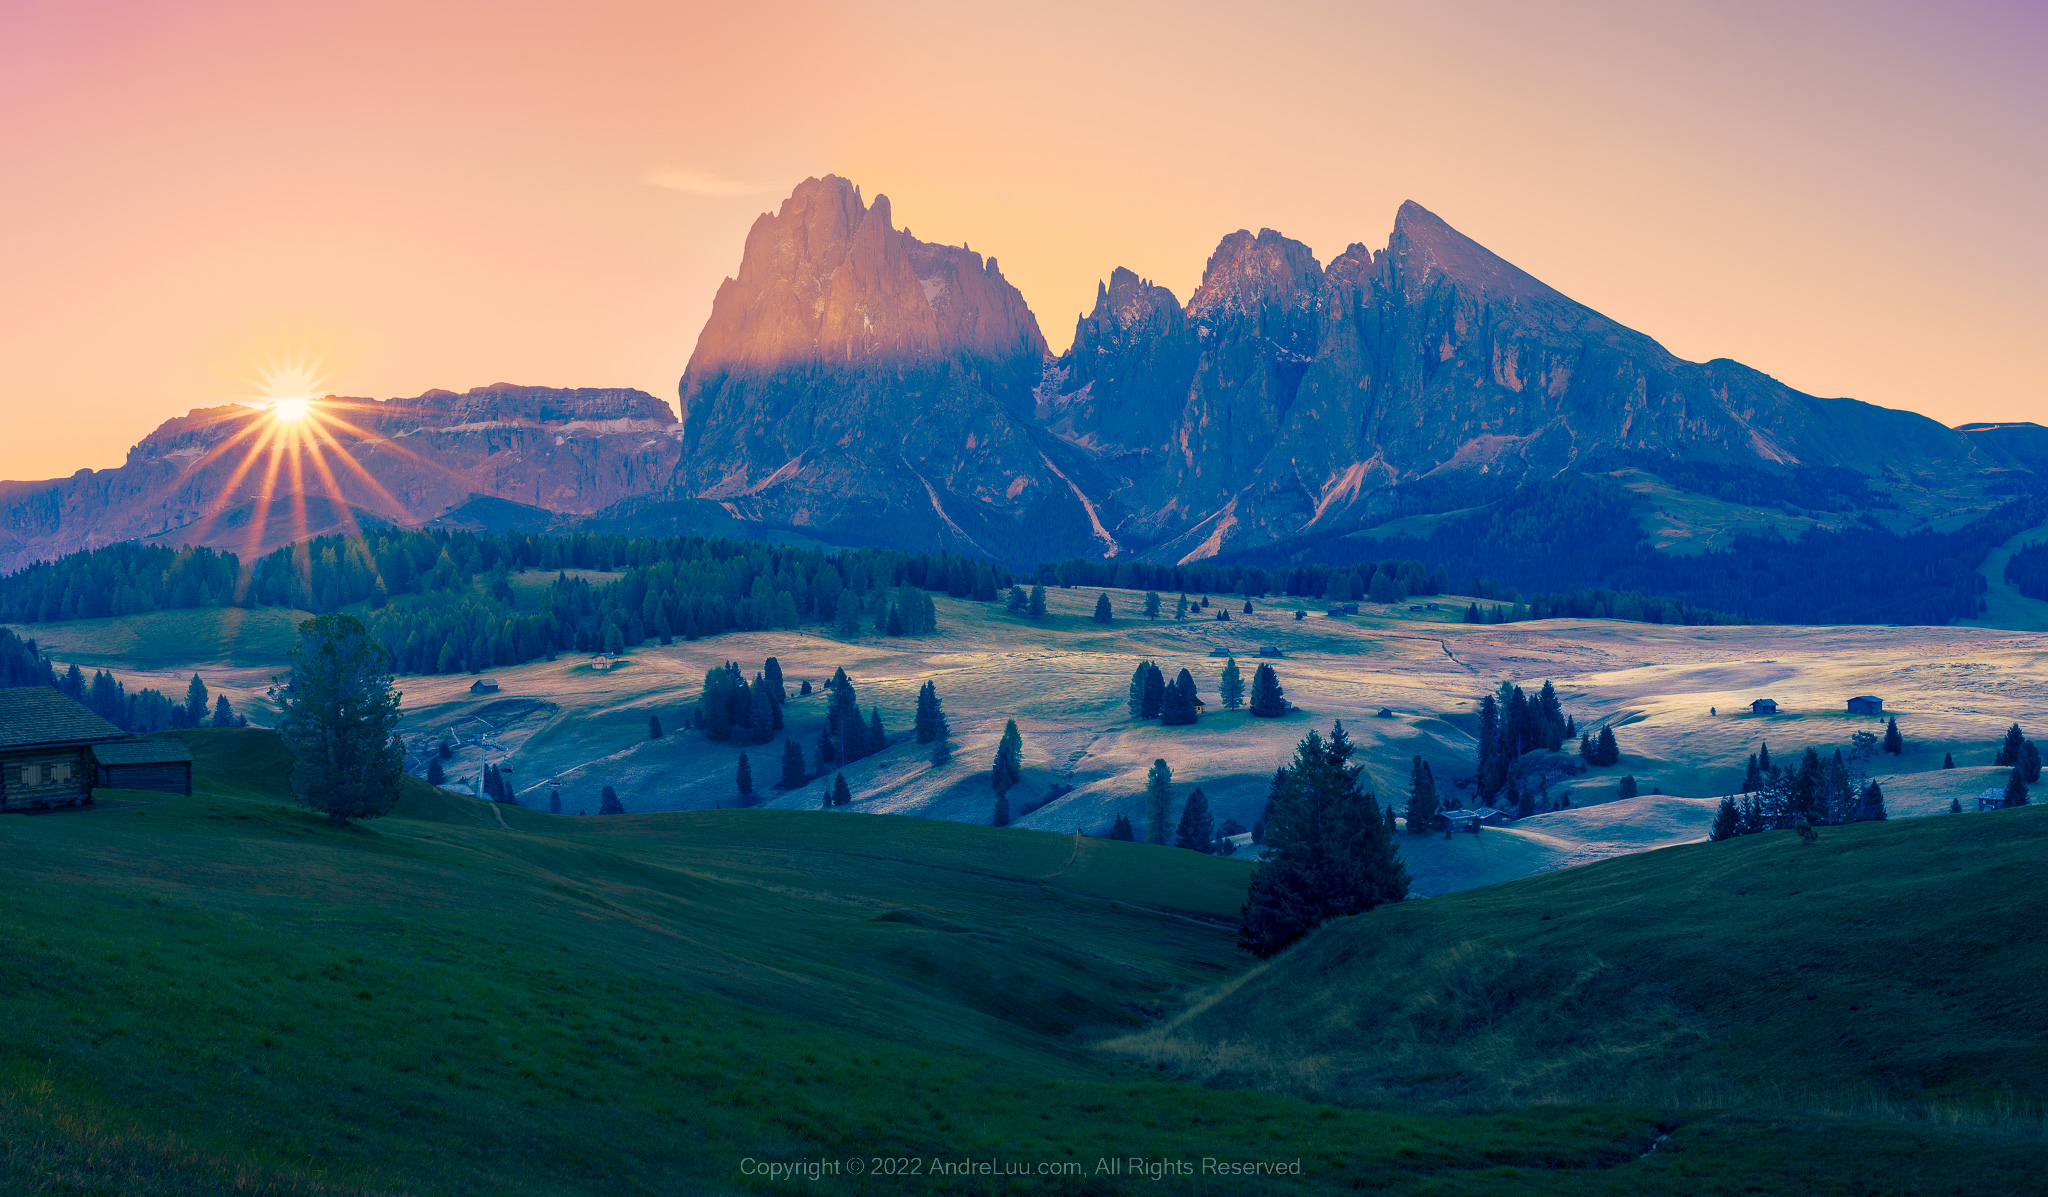 STAR OF SIUSI (Tia Sáng Cao Nguyên) 1/15s F/11 ISO 100 WB 5900. Sony a7m4 + Tamron 35-150mm F/2-2.8 for Sony @ 35mm, AndreLuu M6 Tripod, Dolomites, Italy.